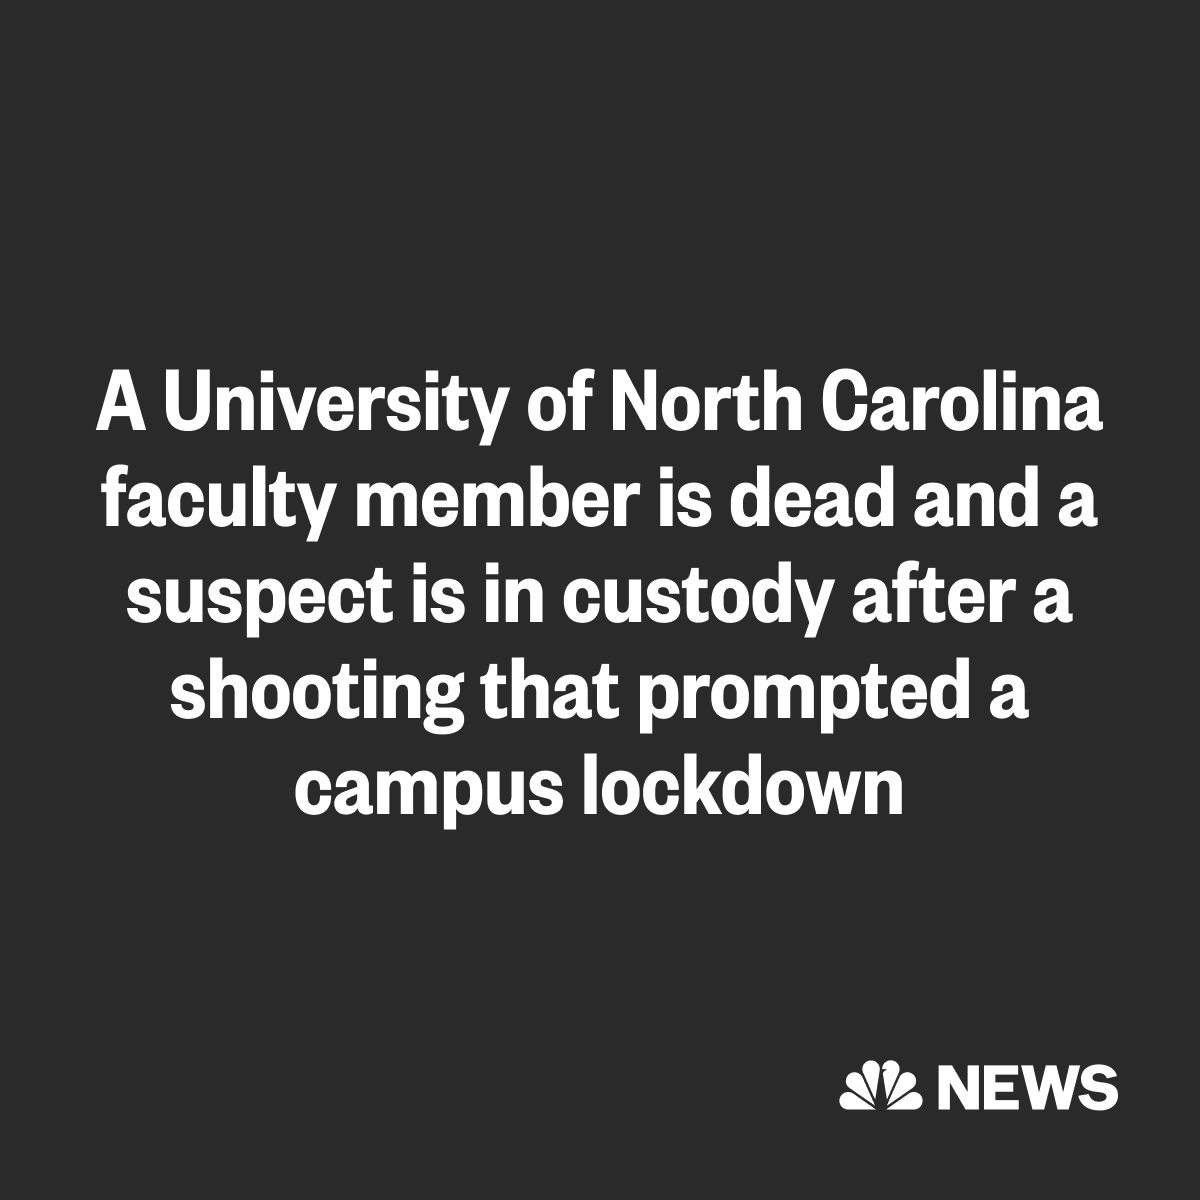 LATEST: A University of North Carolina faculty member is dead and a suspect is in custody after a shooting that prompted a campus lockdown. nbcnews.app.link/AL0xKaDTDCb